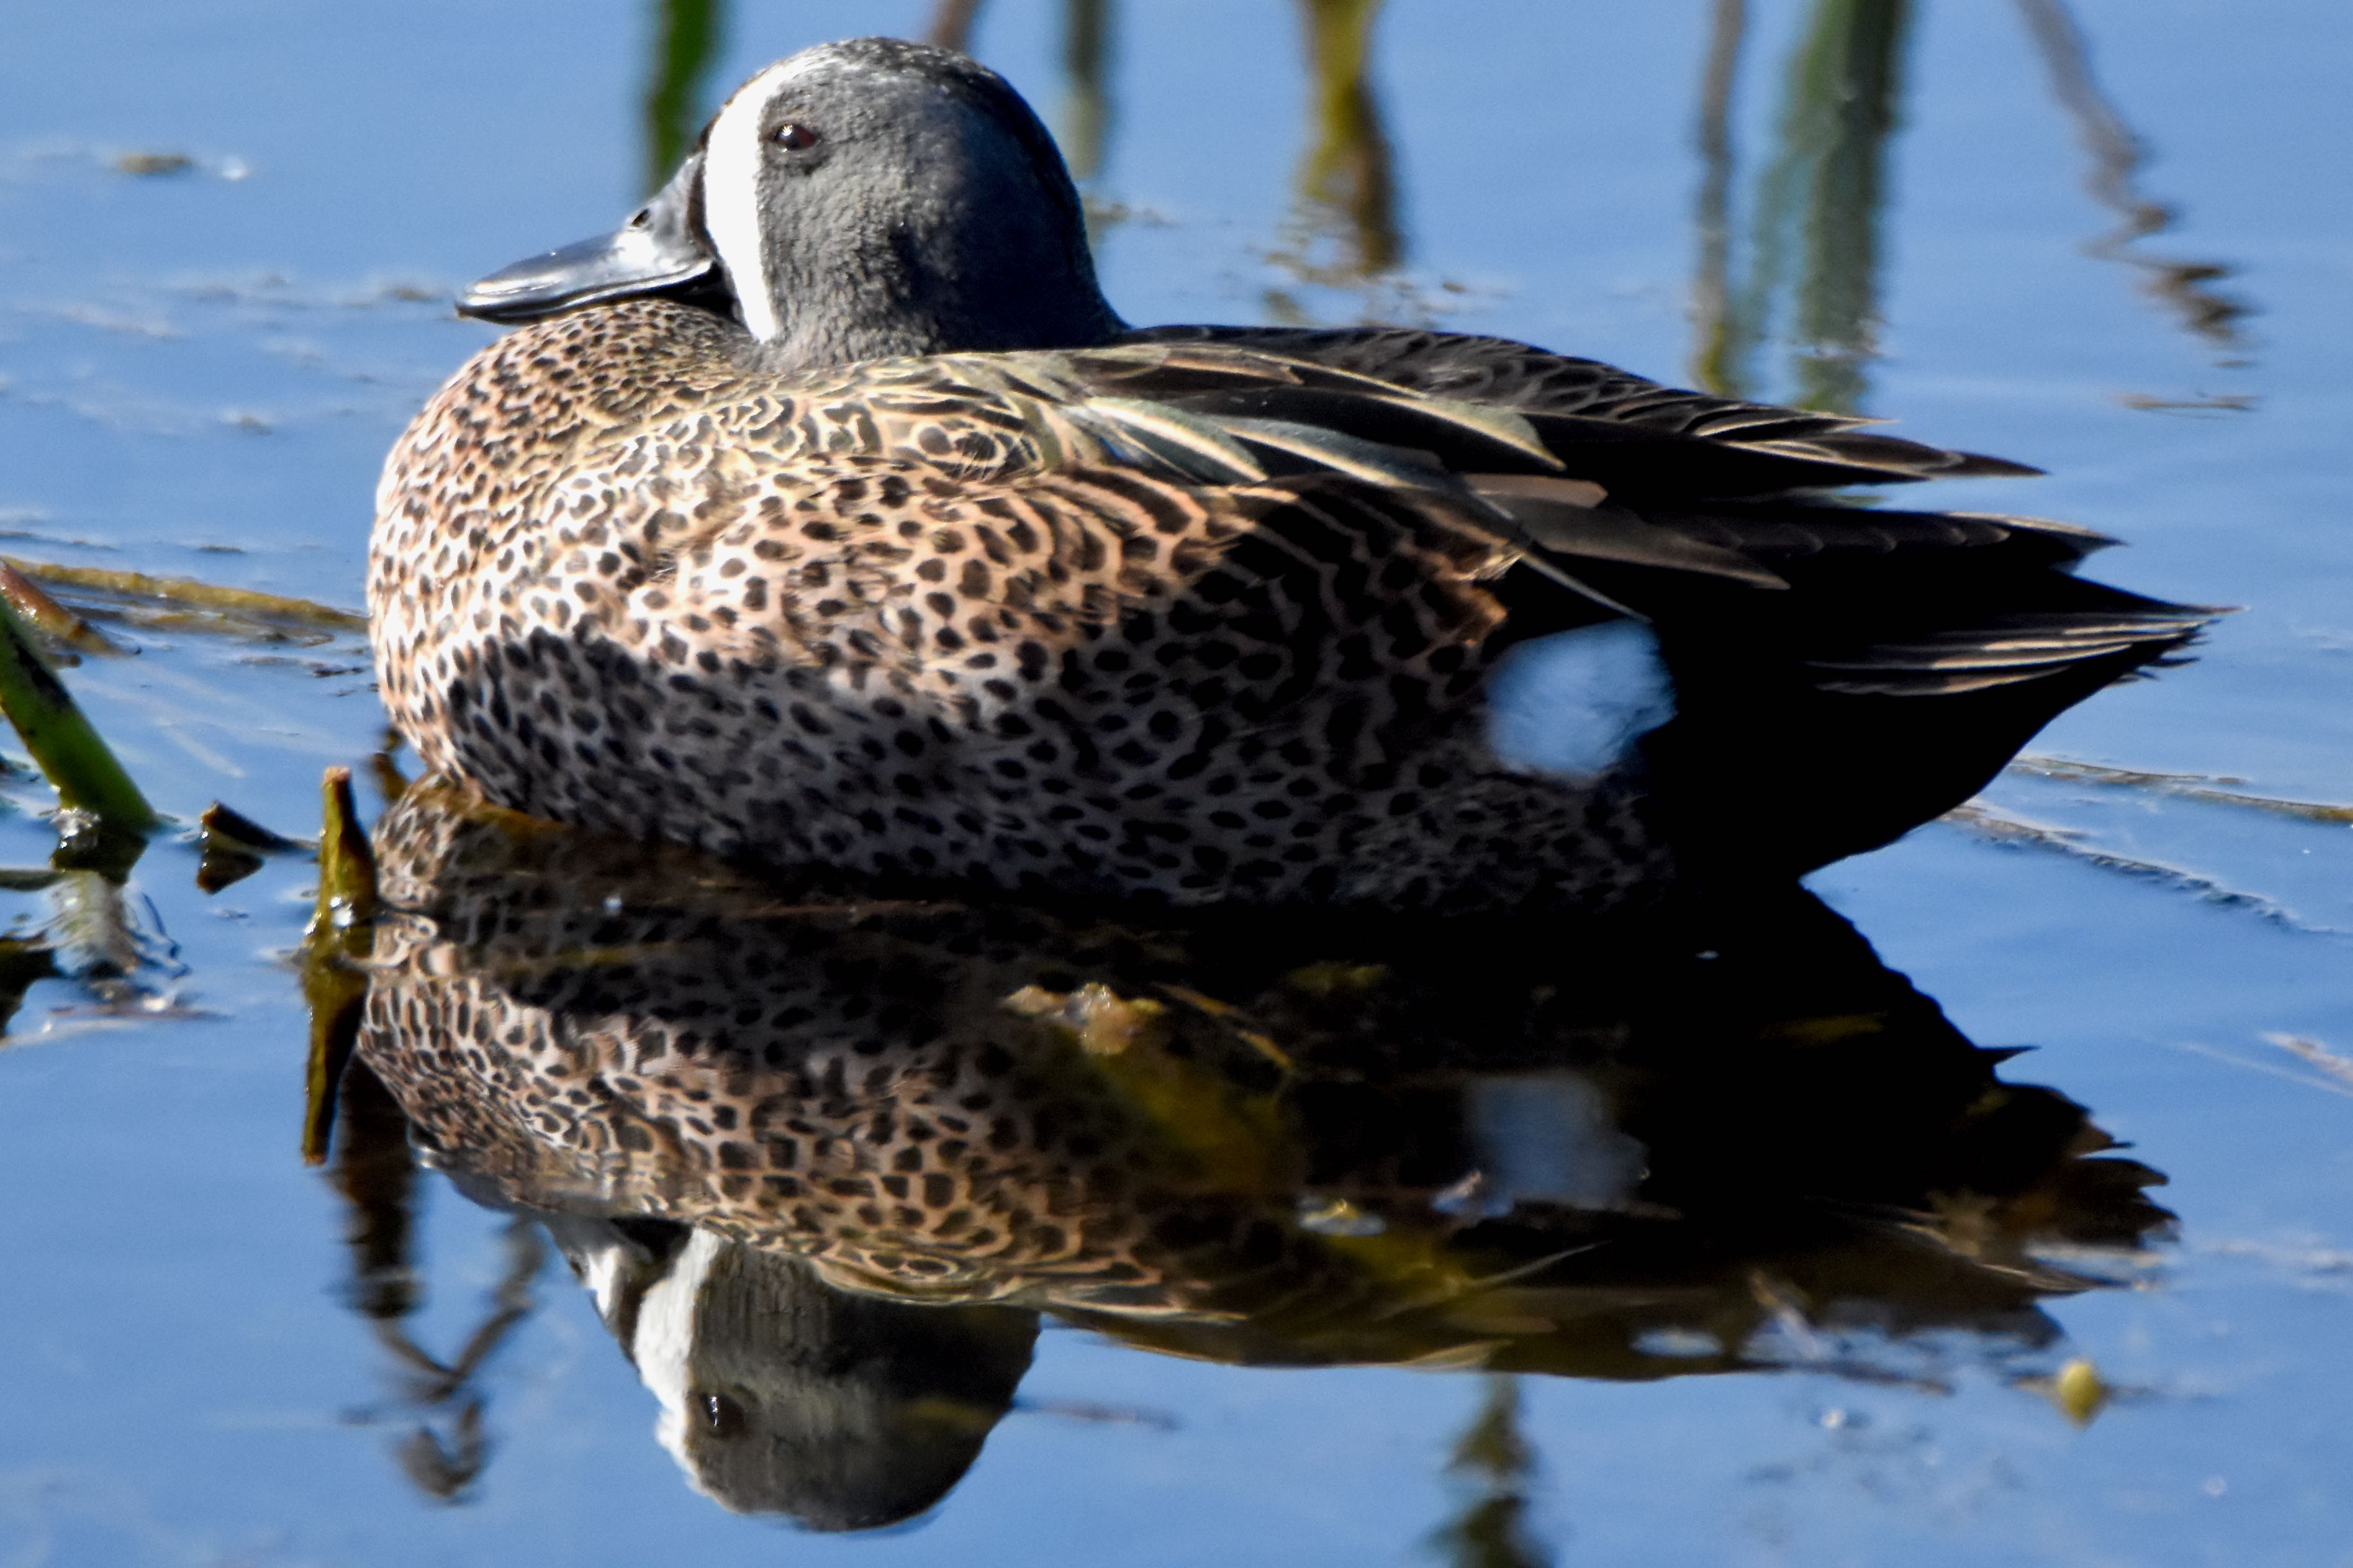 blue-winged teal